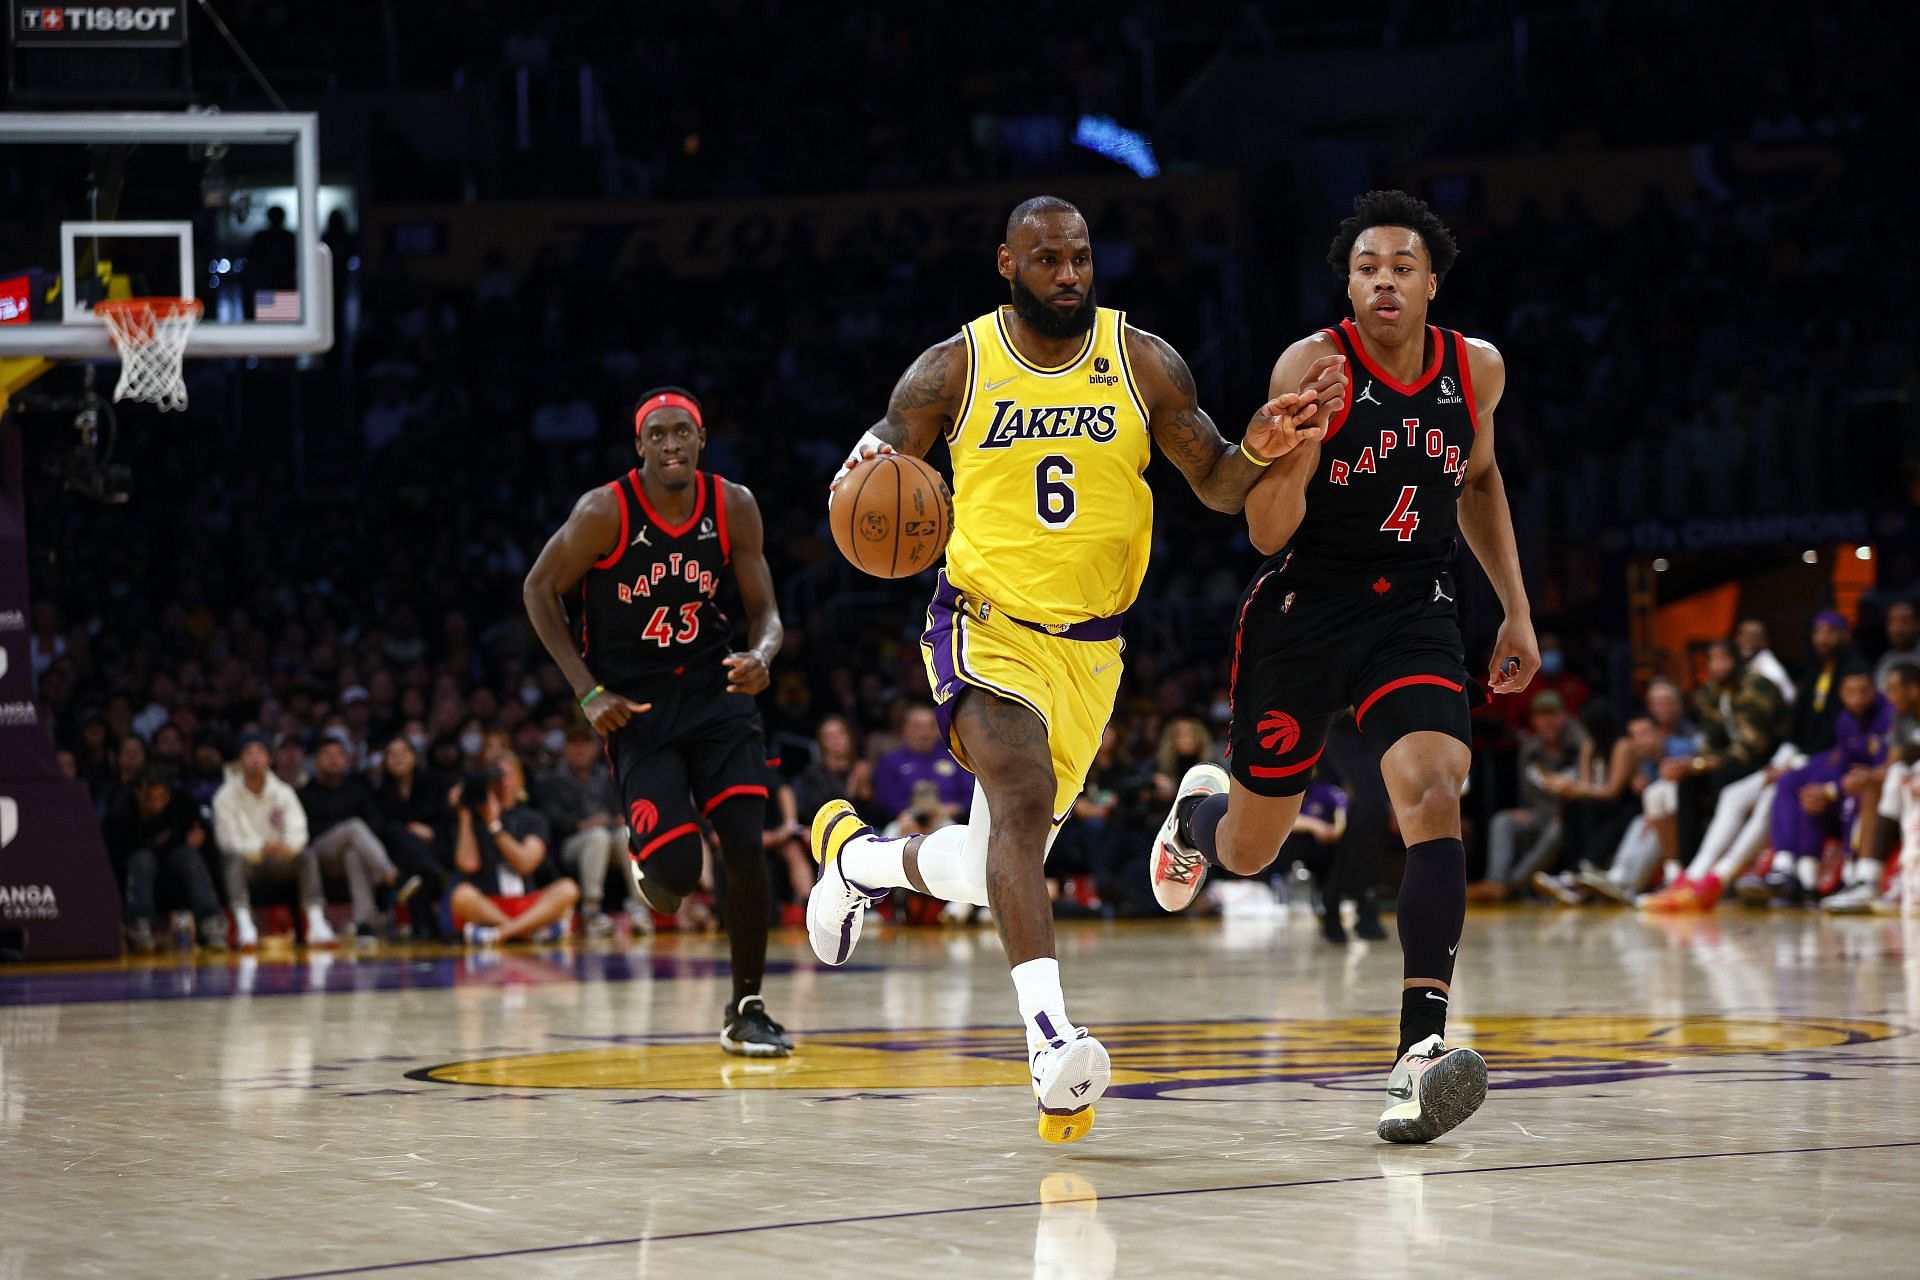 LA Lakers forward LeBron James with the ball